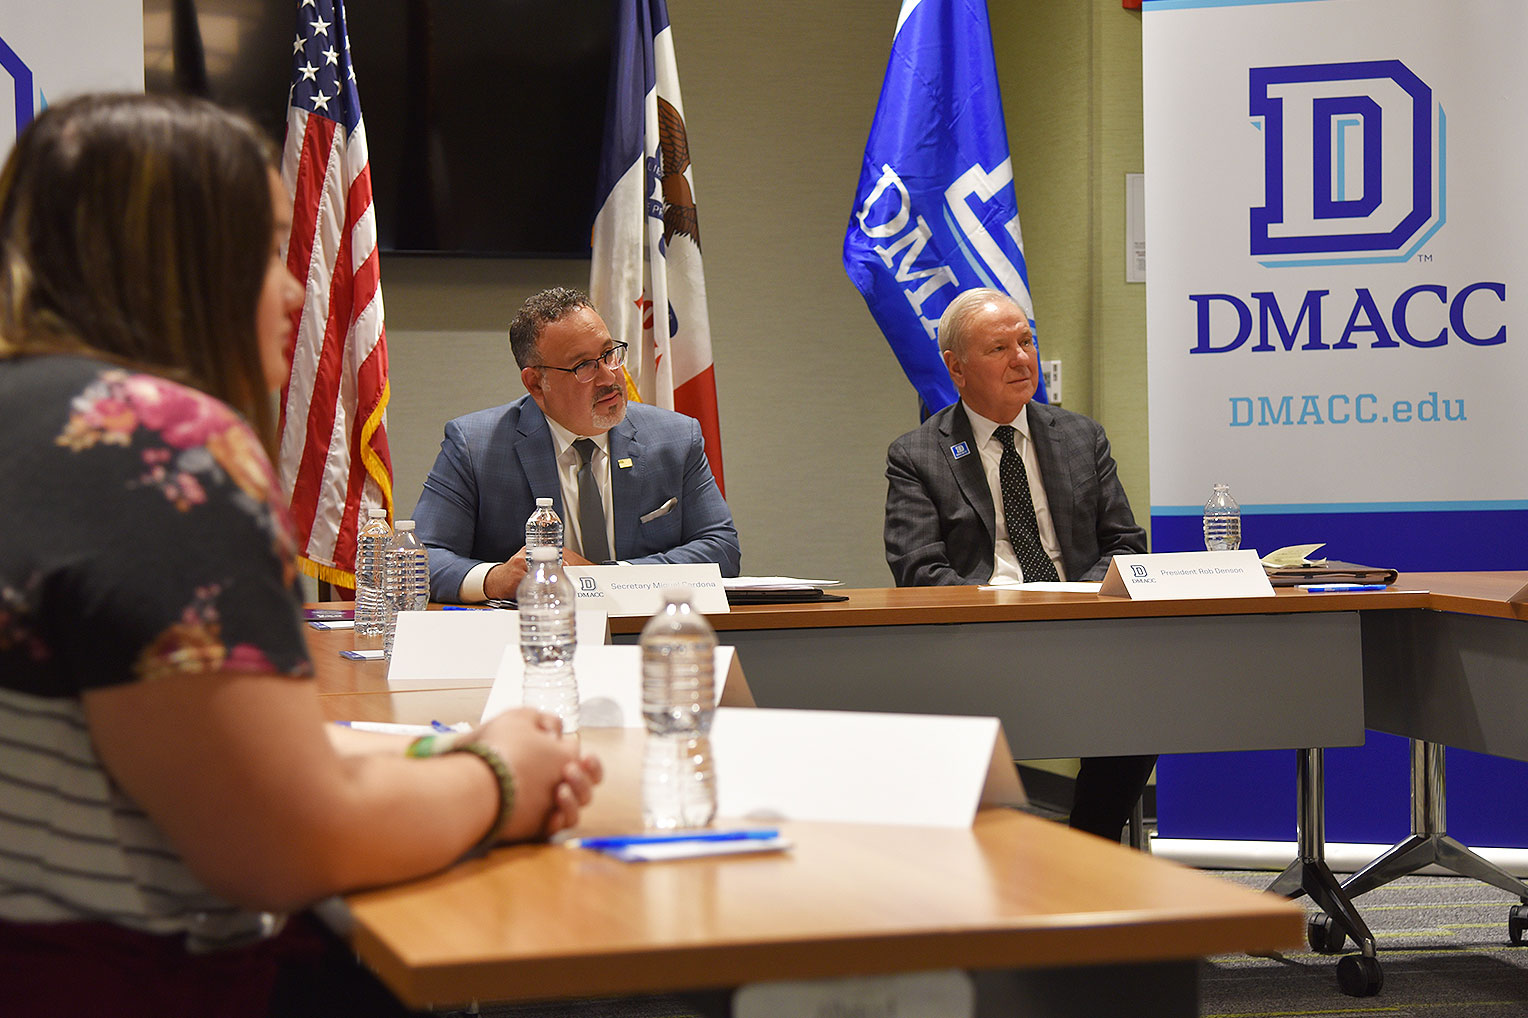 U.S. Secretary of Education Dr. Miguel Cardona (left) and DMACC President Rob Denson (right) listen intently as DMACC Education students talk about their experiences and how the DMACC Paraeducator Certificate Program has helped them overcome challenges and pursue their goal of working in education.